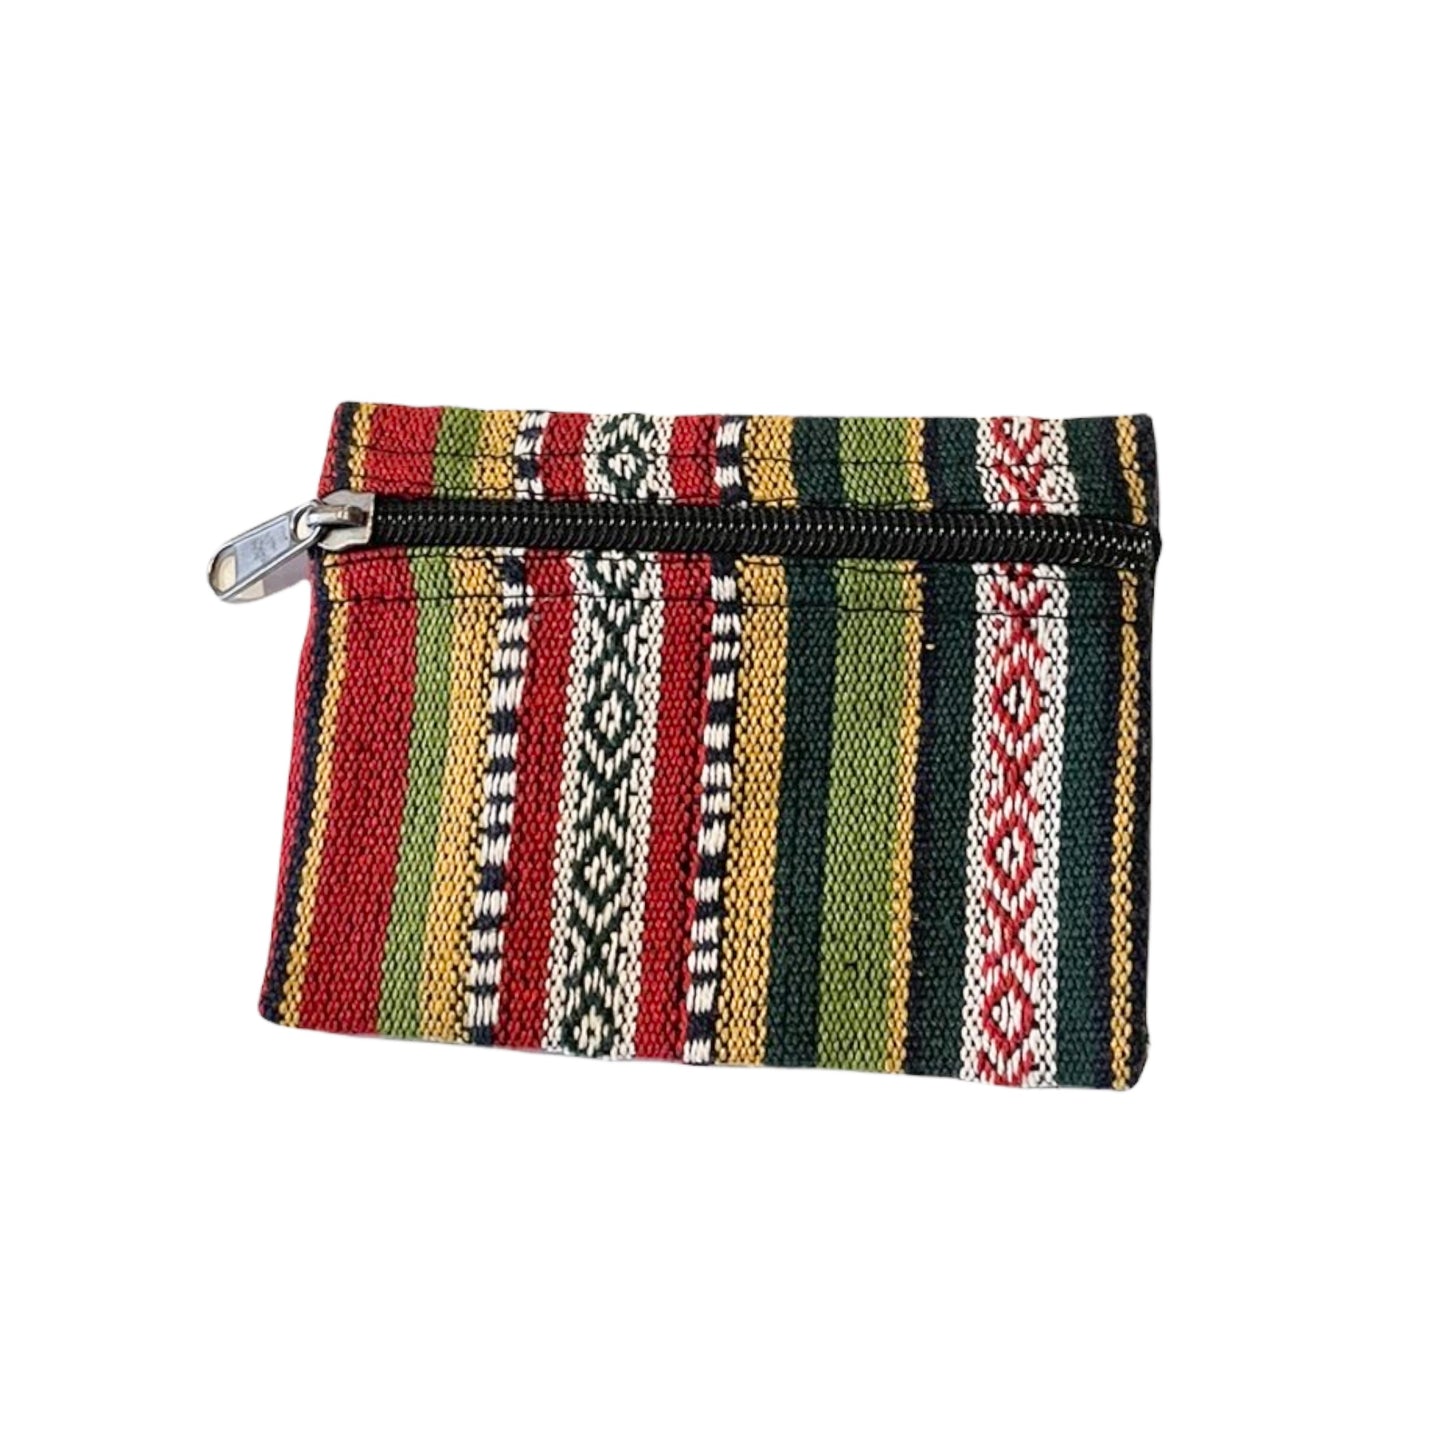 Cotton Small Coin Purse, Zippered Ghere Mini Wallets, Vegan Purse, Eco Friendly Purse, Nepali Bag Coin Purse, Gift For Her, Colorful Purse